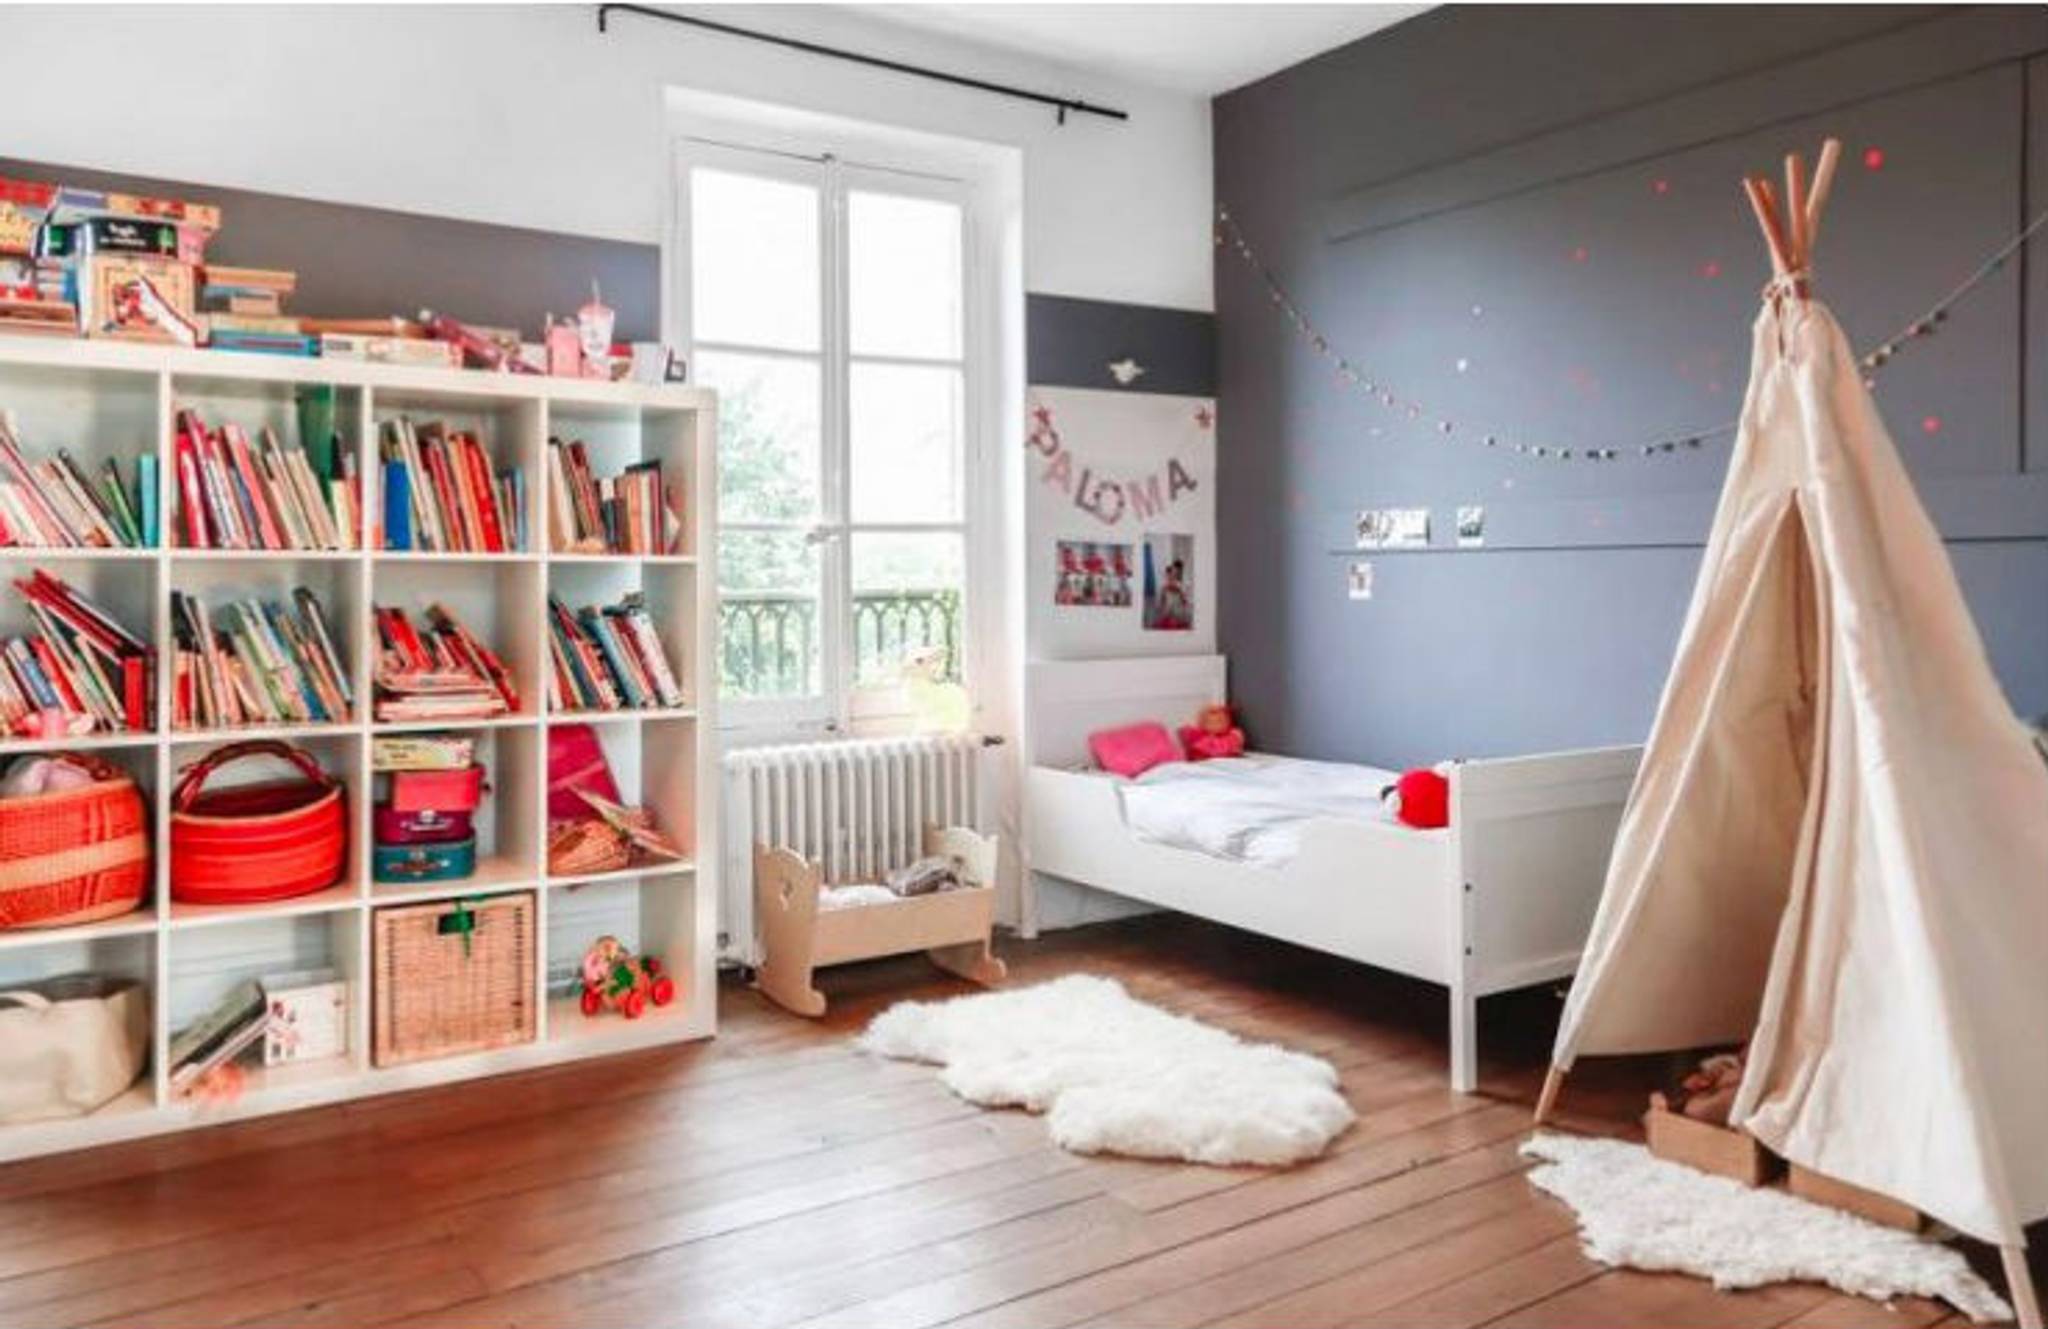 Kid & Coe is Airbnb for families